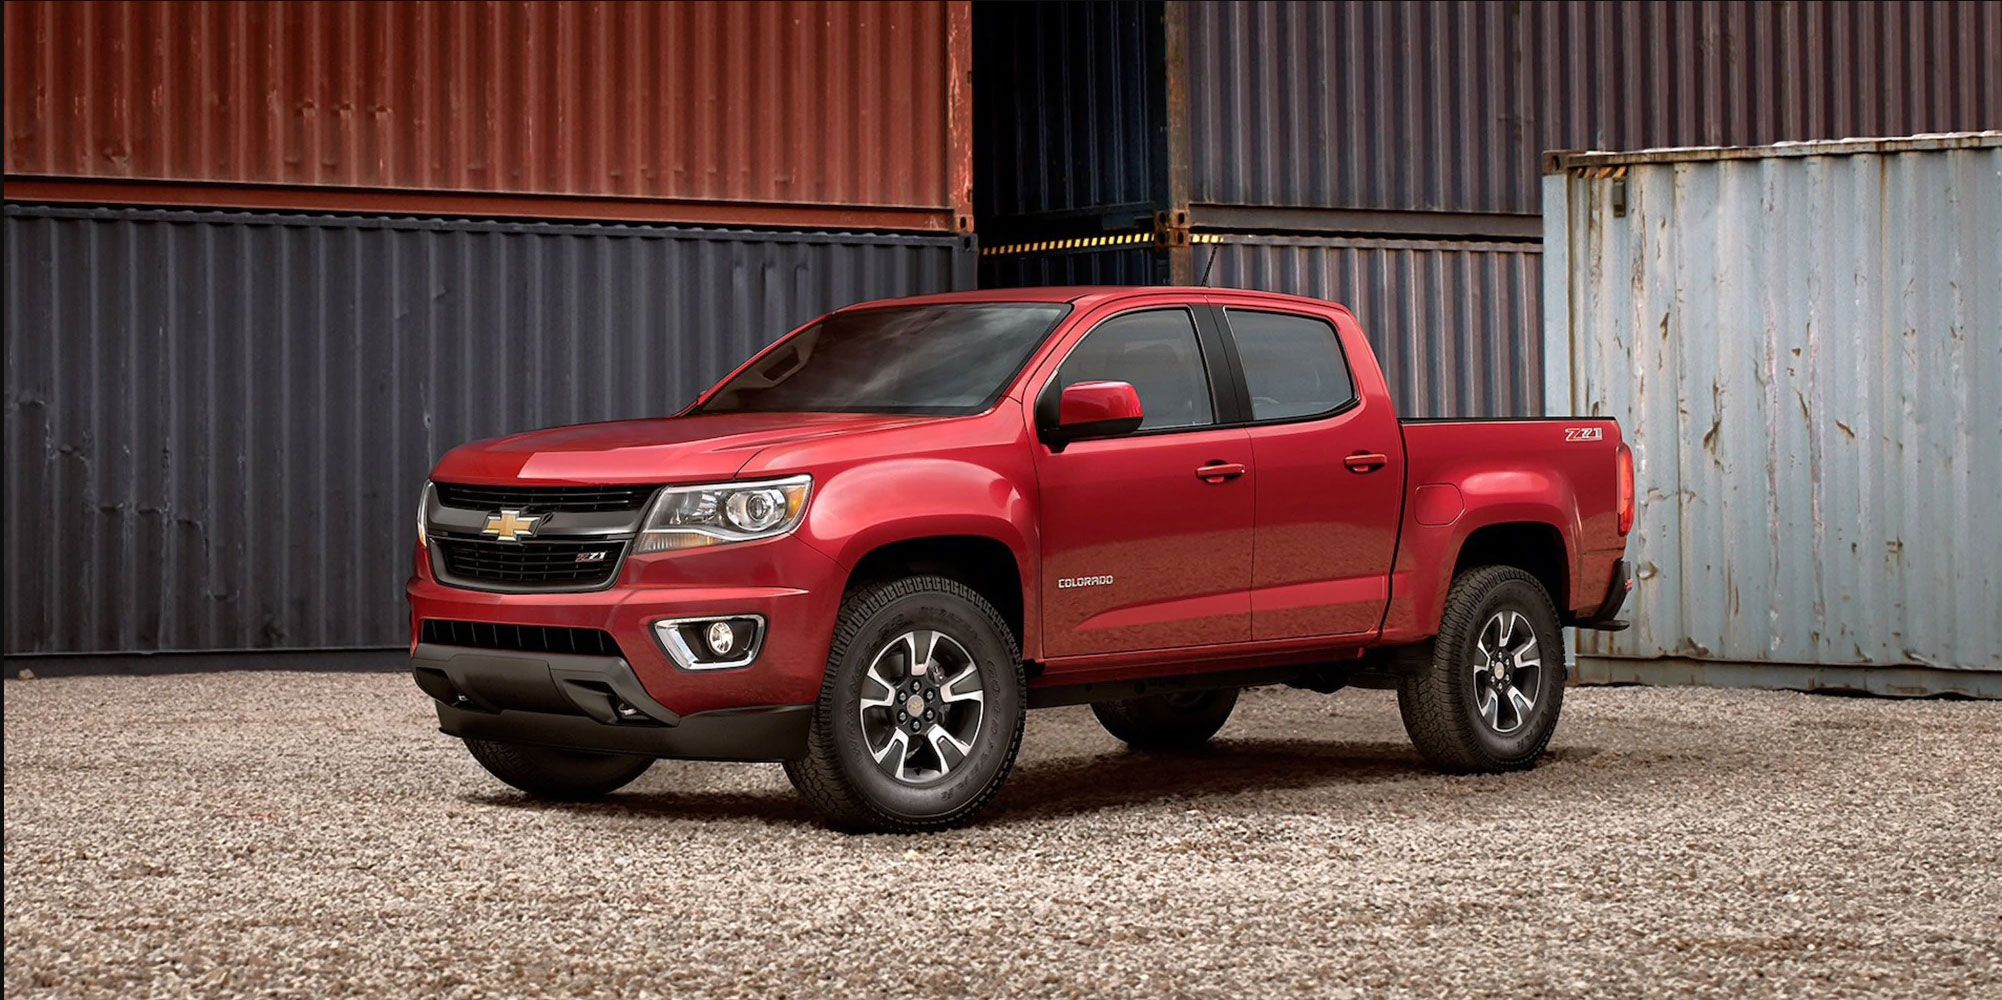 2020 Chevrolet Colorado Review, Pricing, and Specs